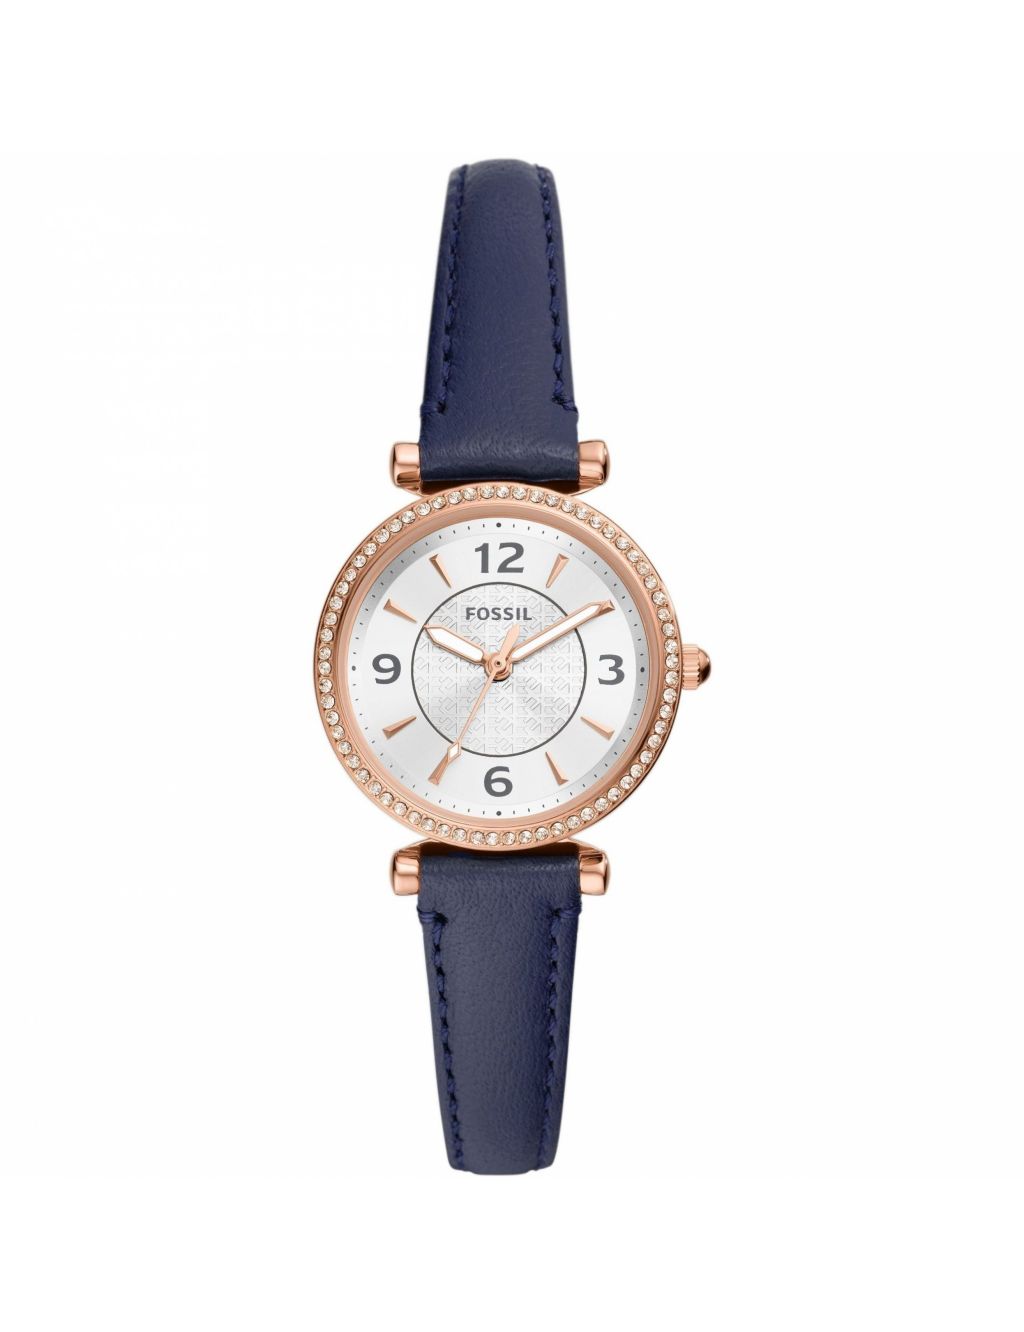 Fossil Carlie Leather Watch